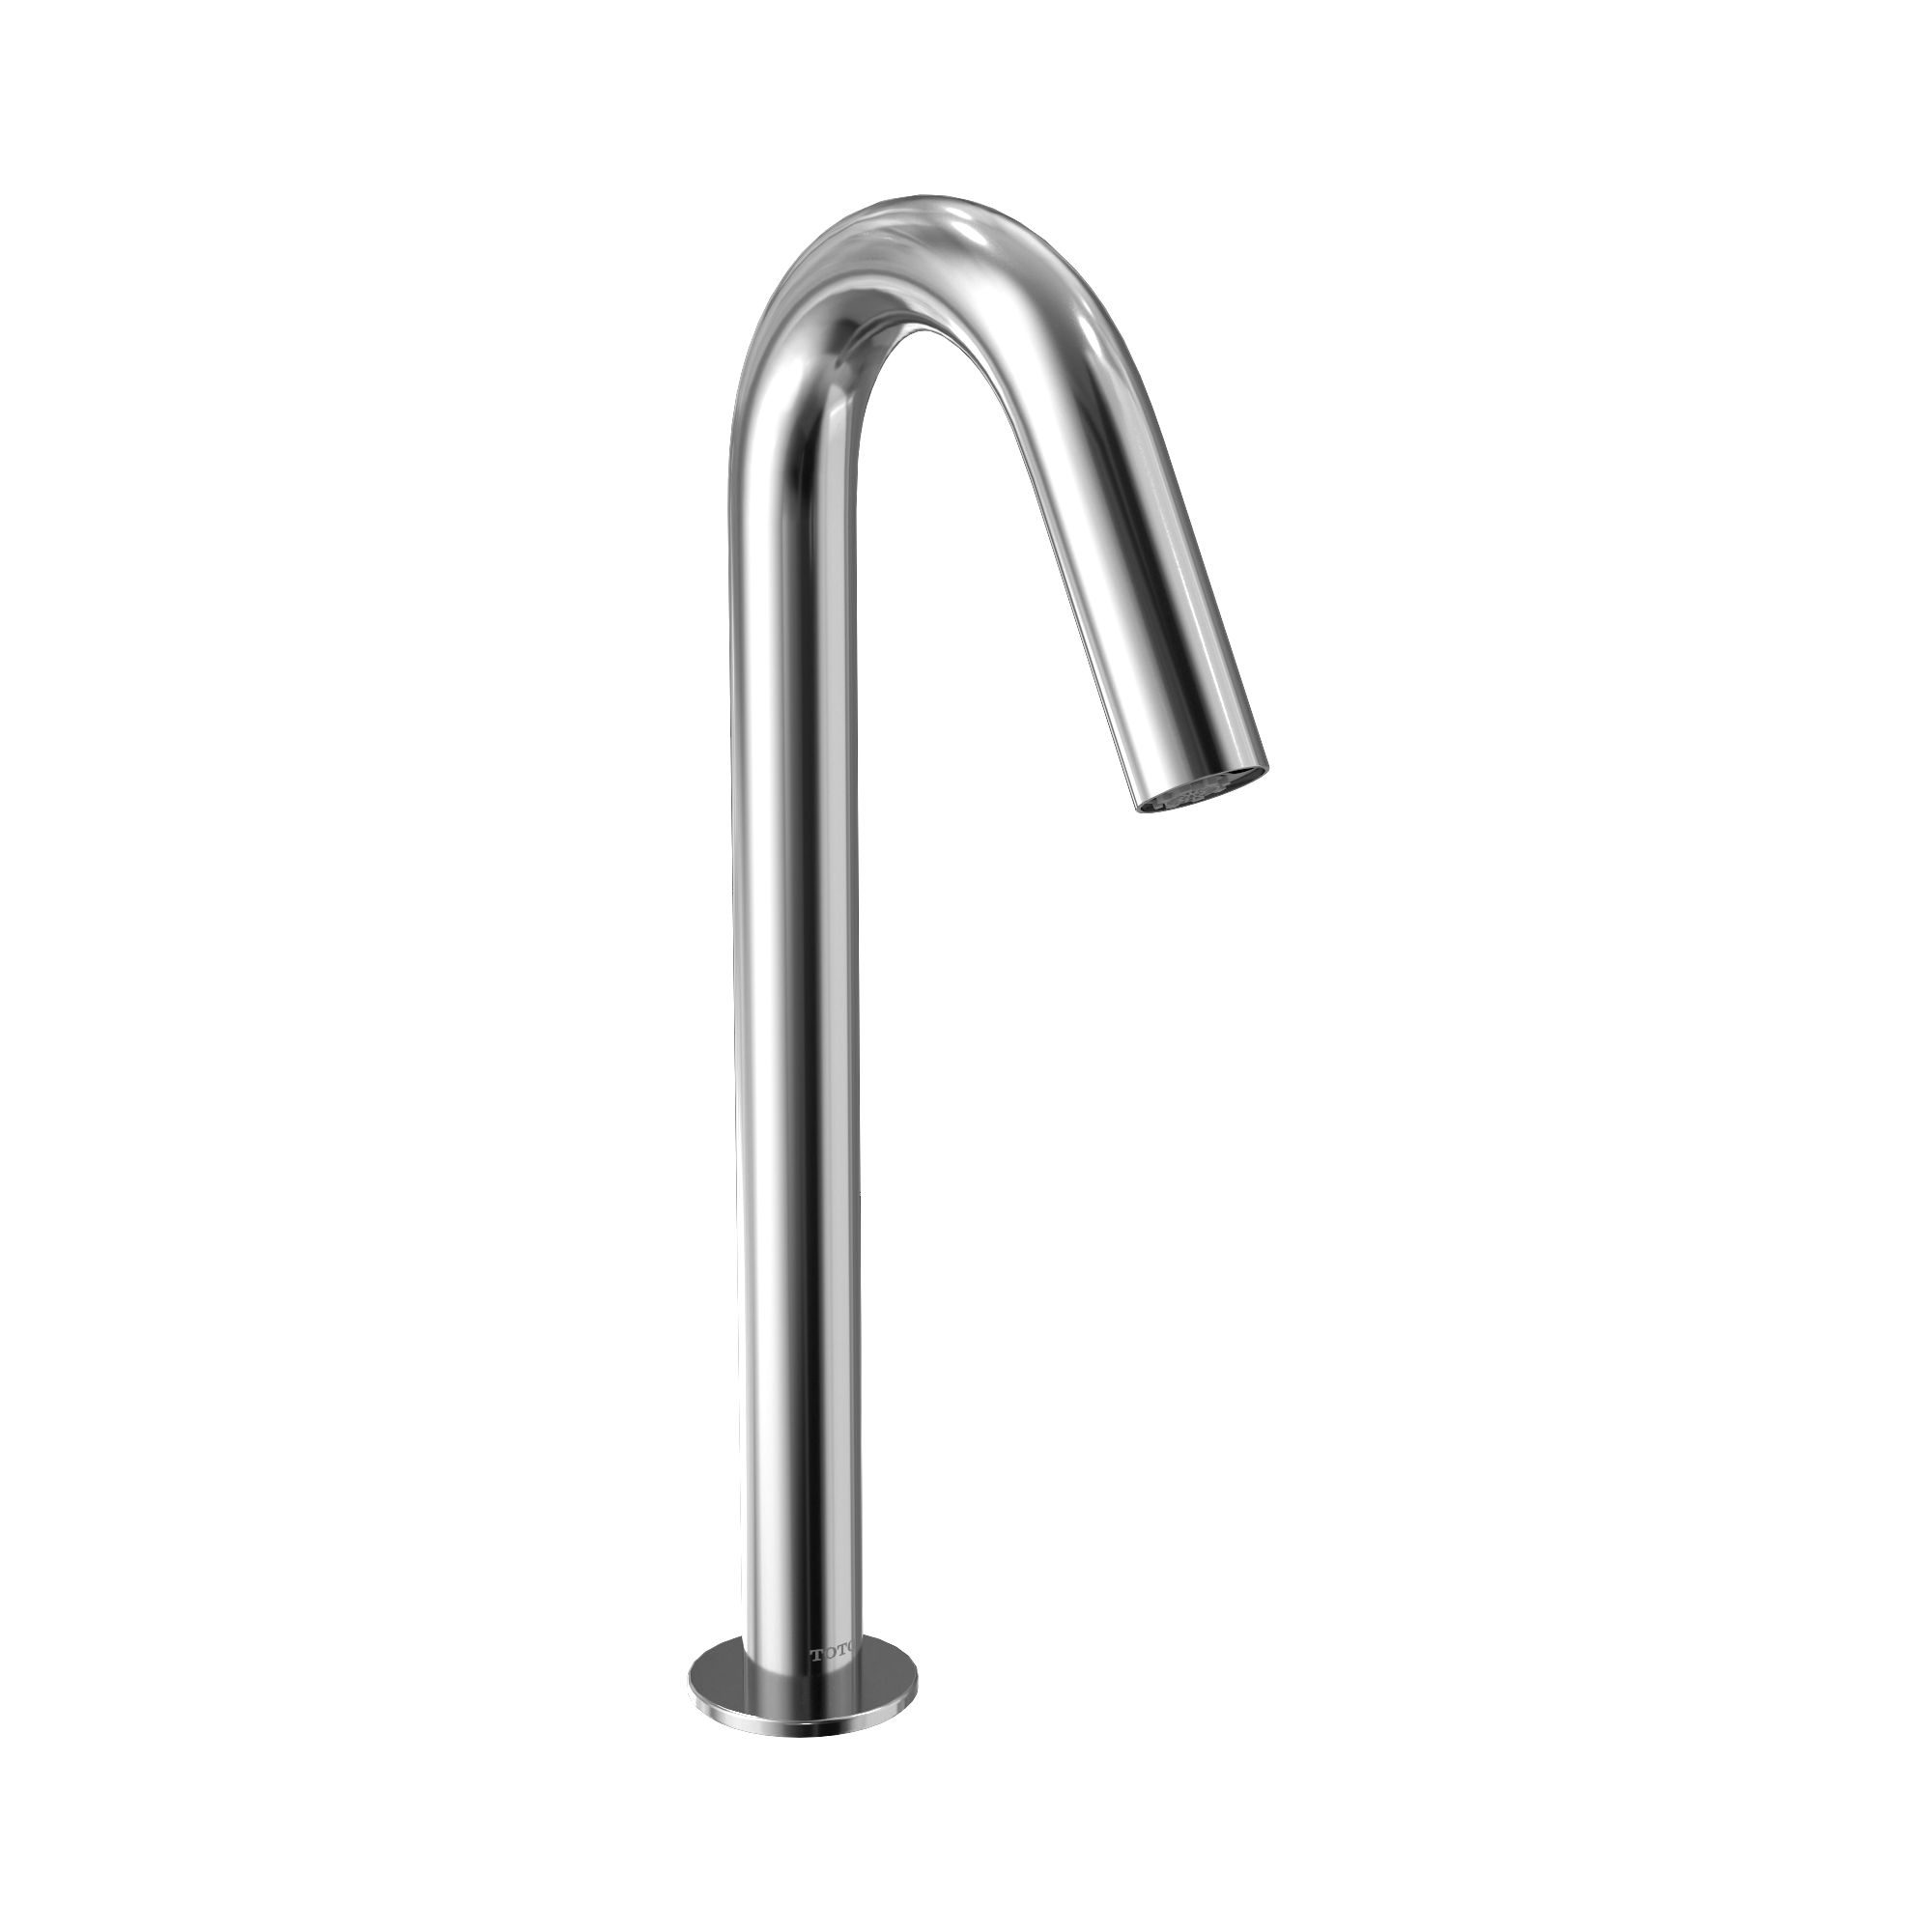 Helix® Touchless Faucet - Vessel - 0.5 GPM